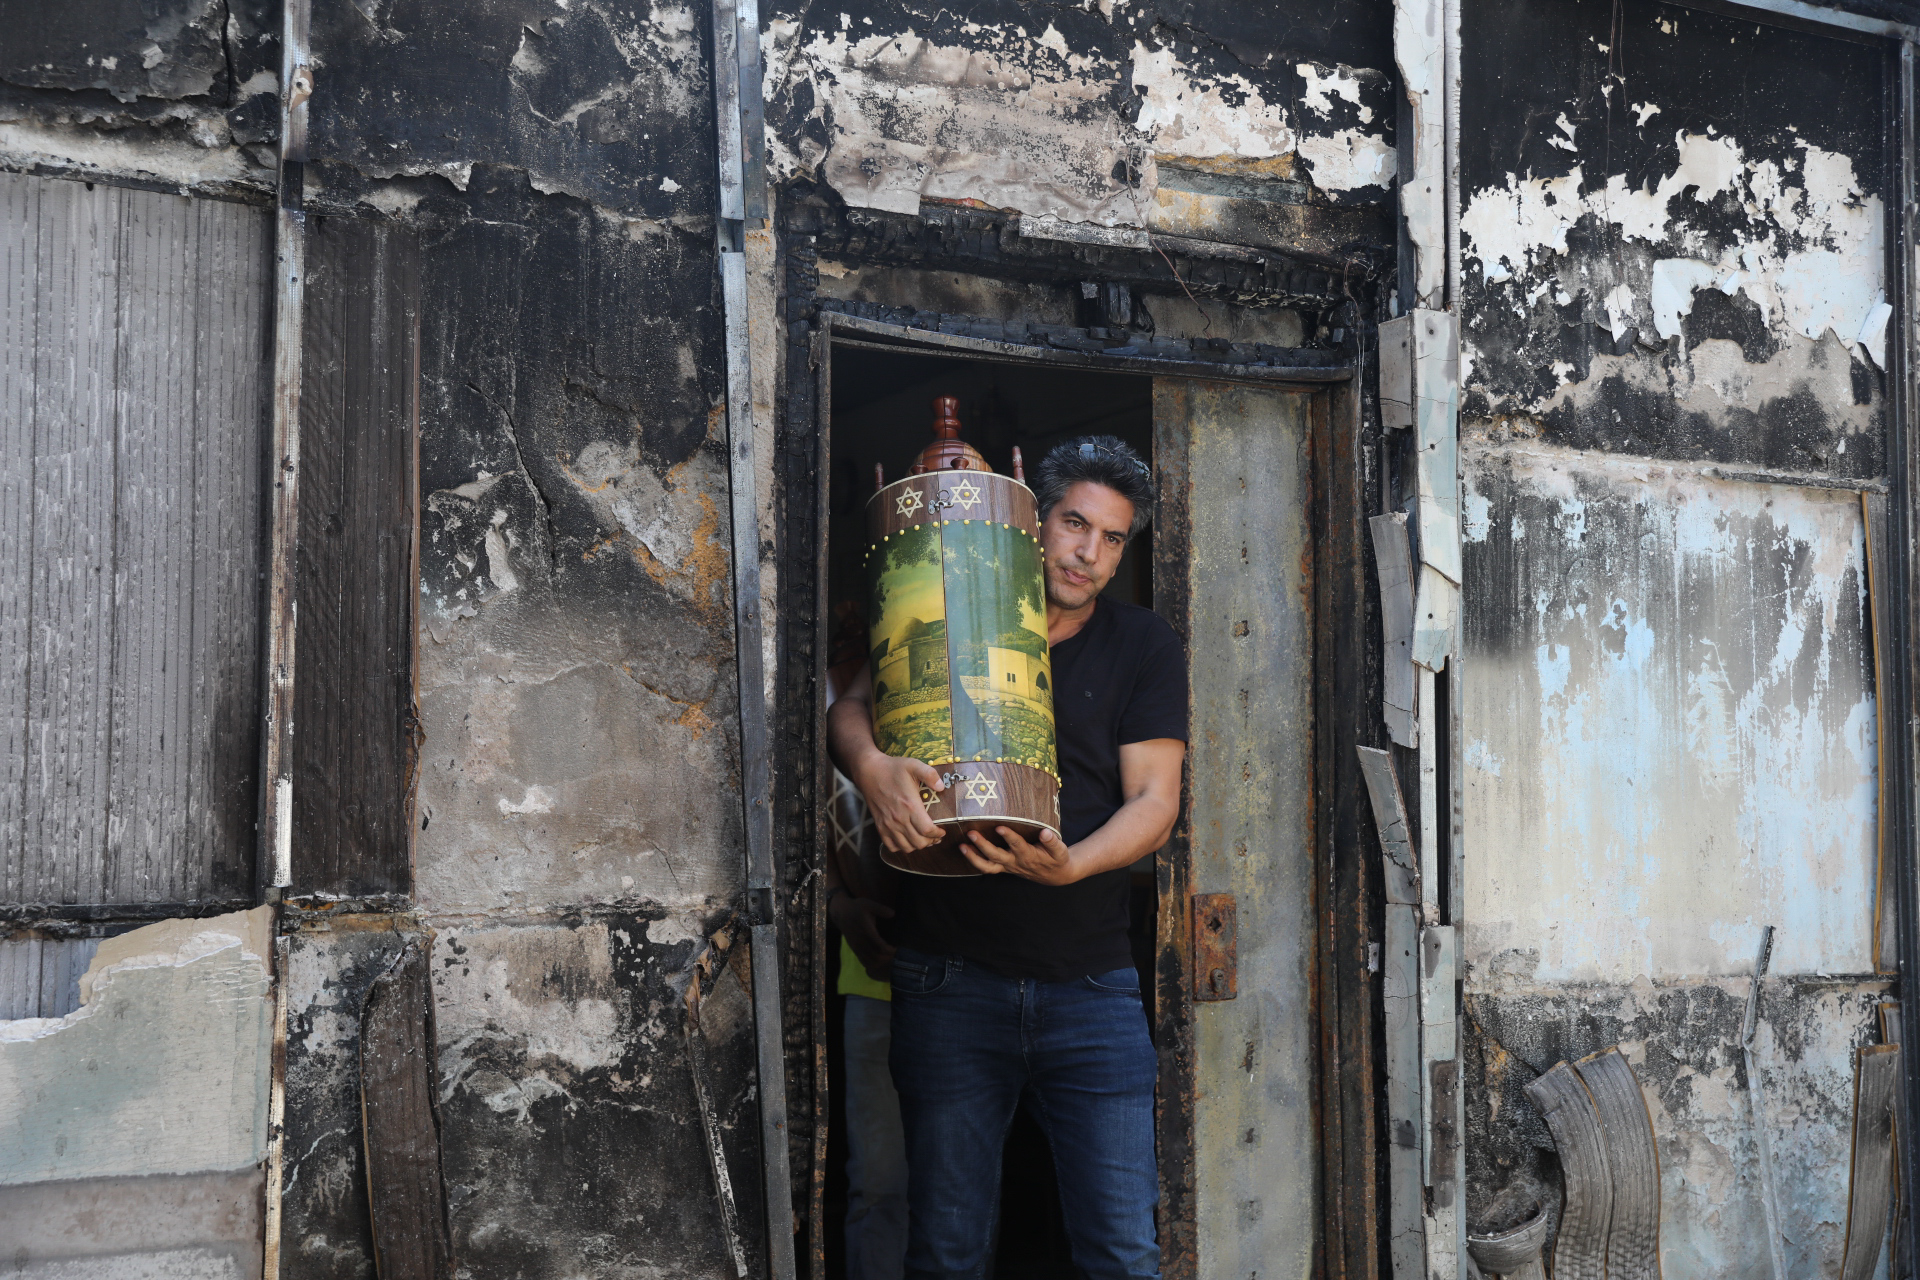 Israelis carry out torahs from a synagogue burned down by Palestinian residents in Lydd, central Israel, May 12, 2021. (Yonatan Sindel/Flash90)